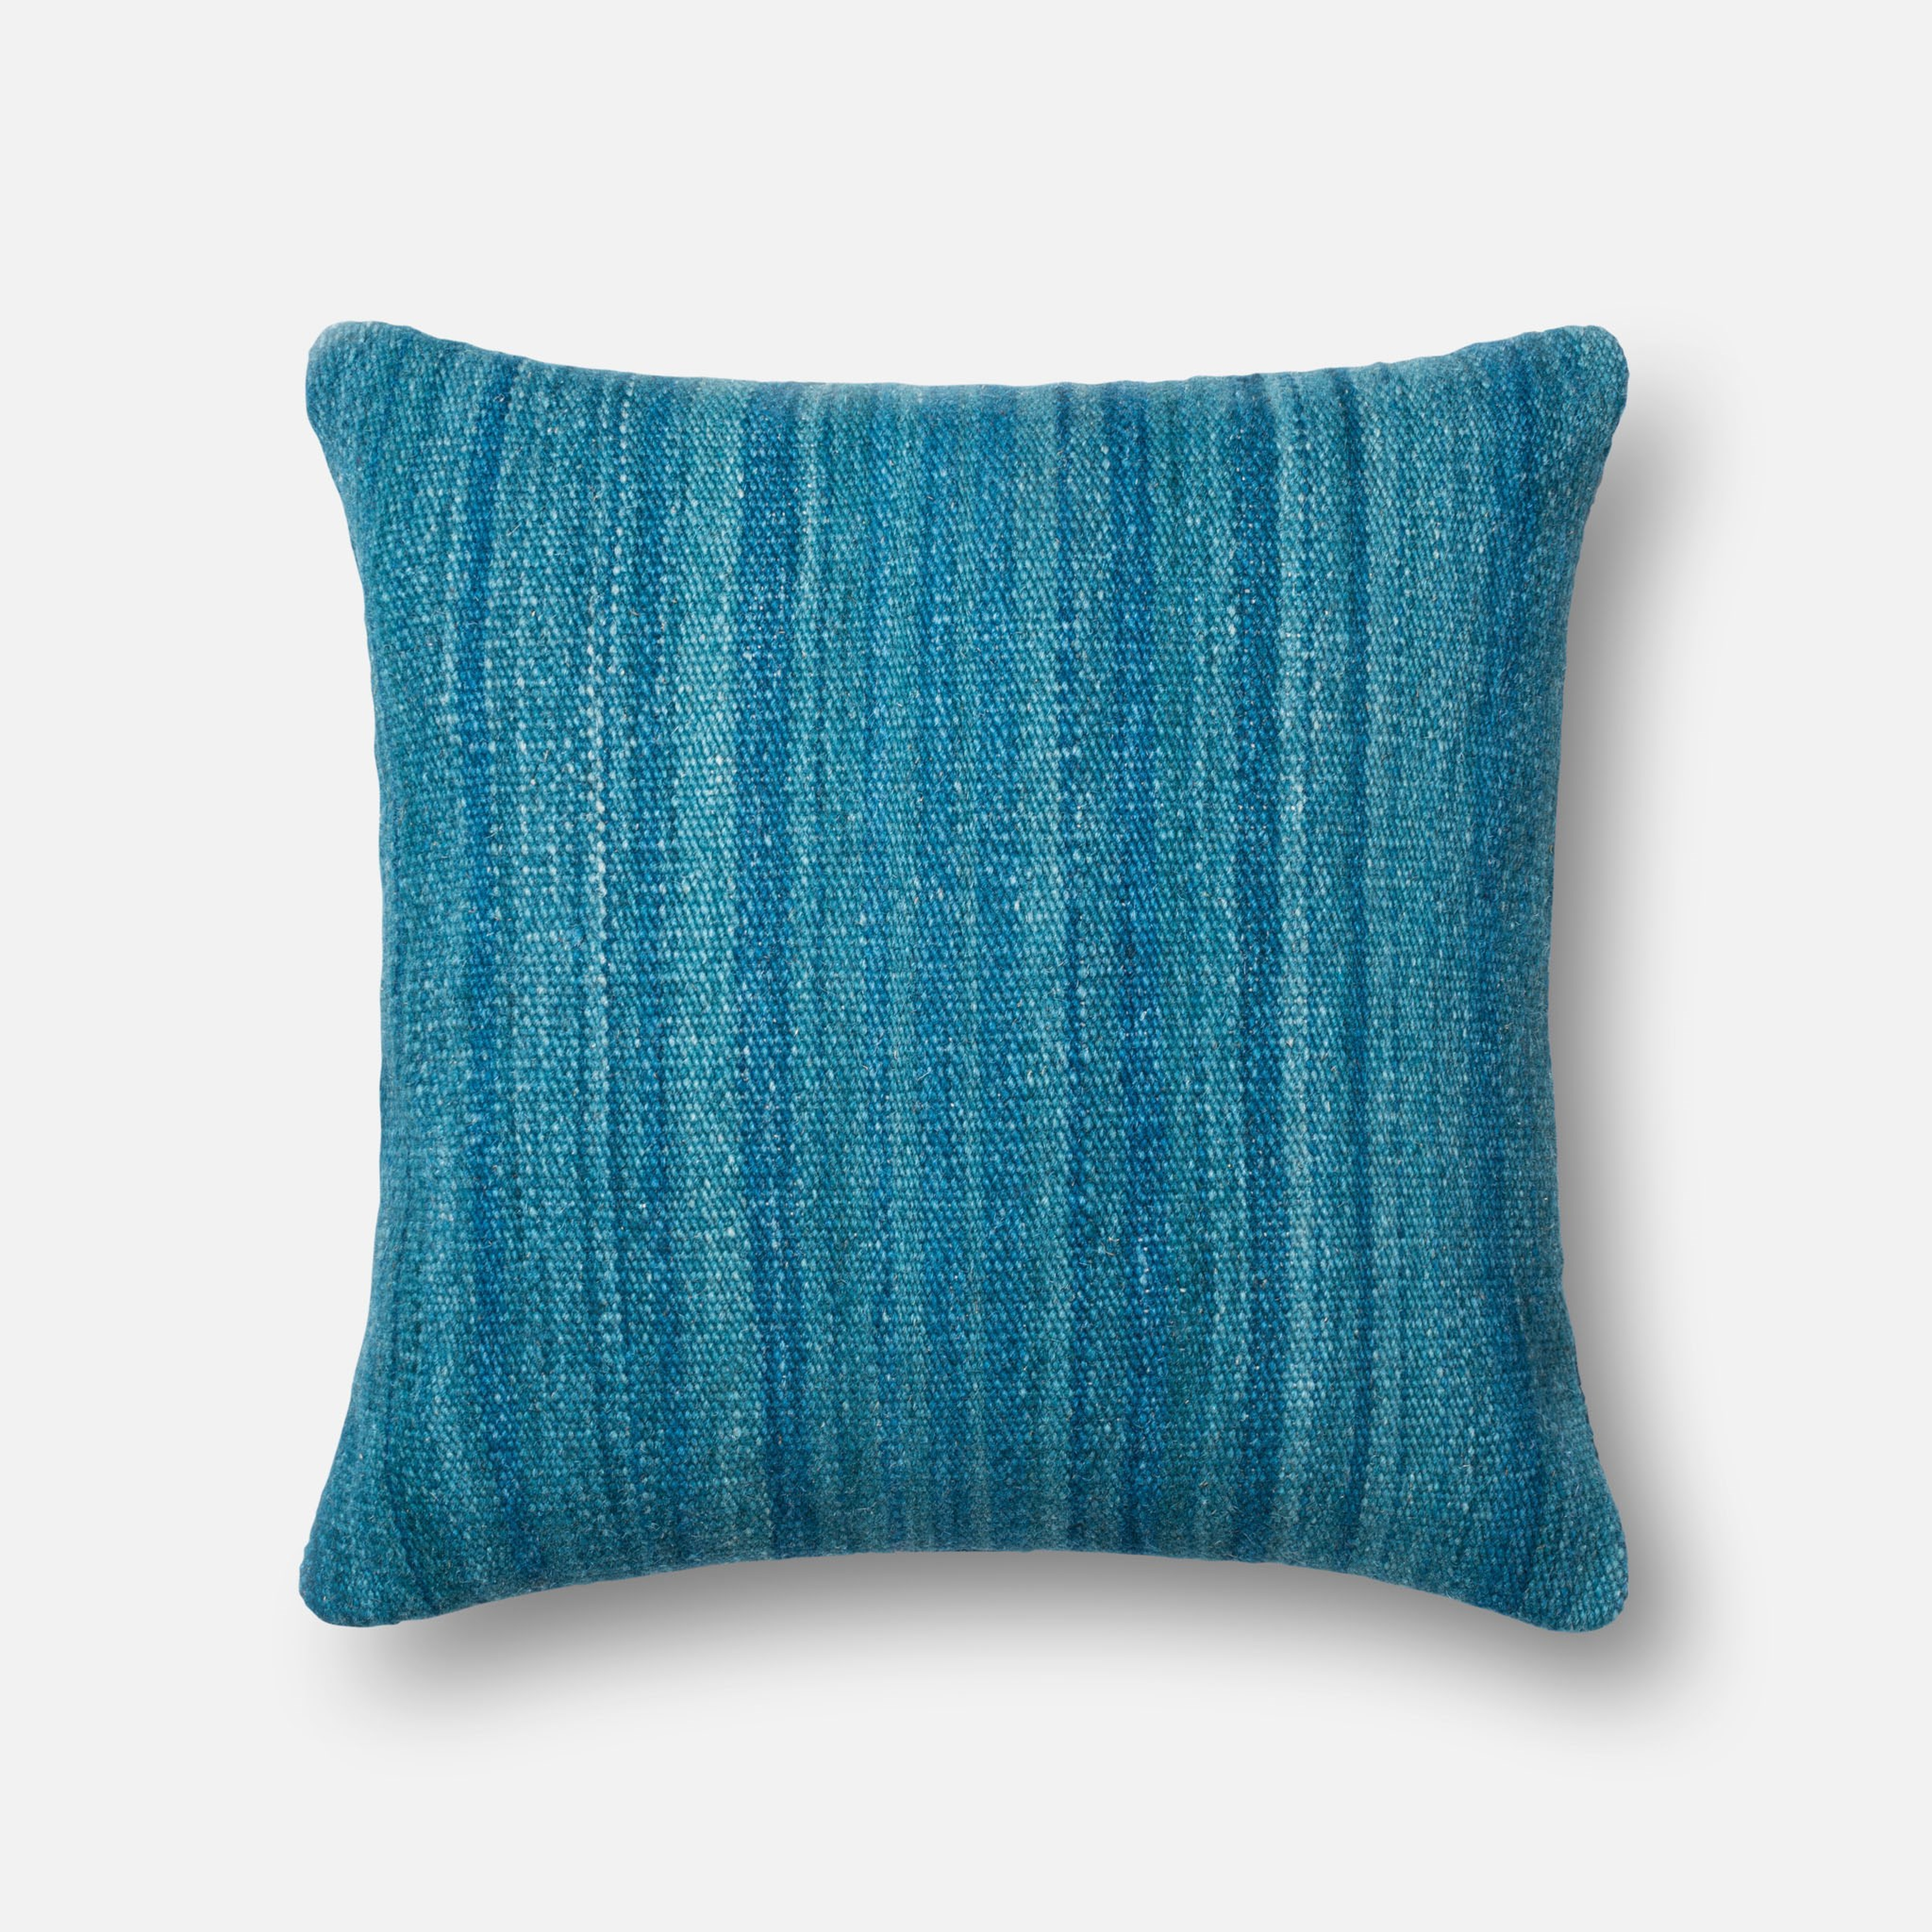 P0167 BLUE Pillow - 22" x 22" with Down Insert - Loloi Rugs